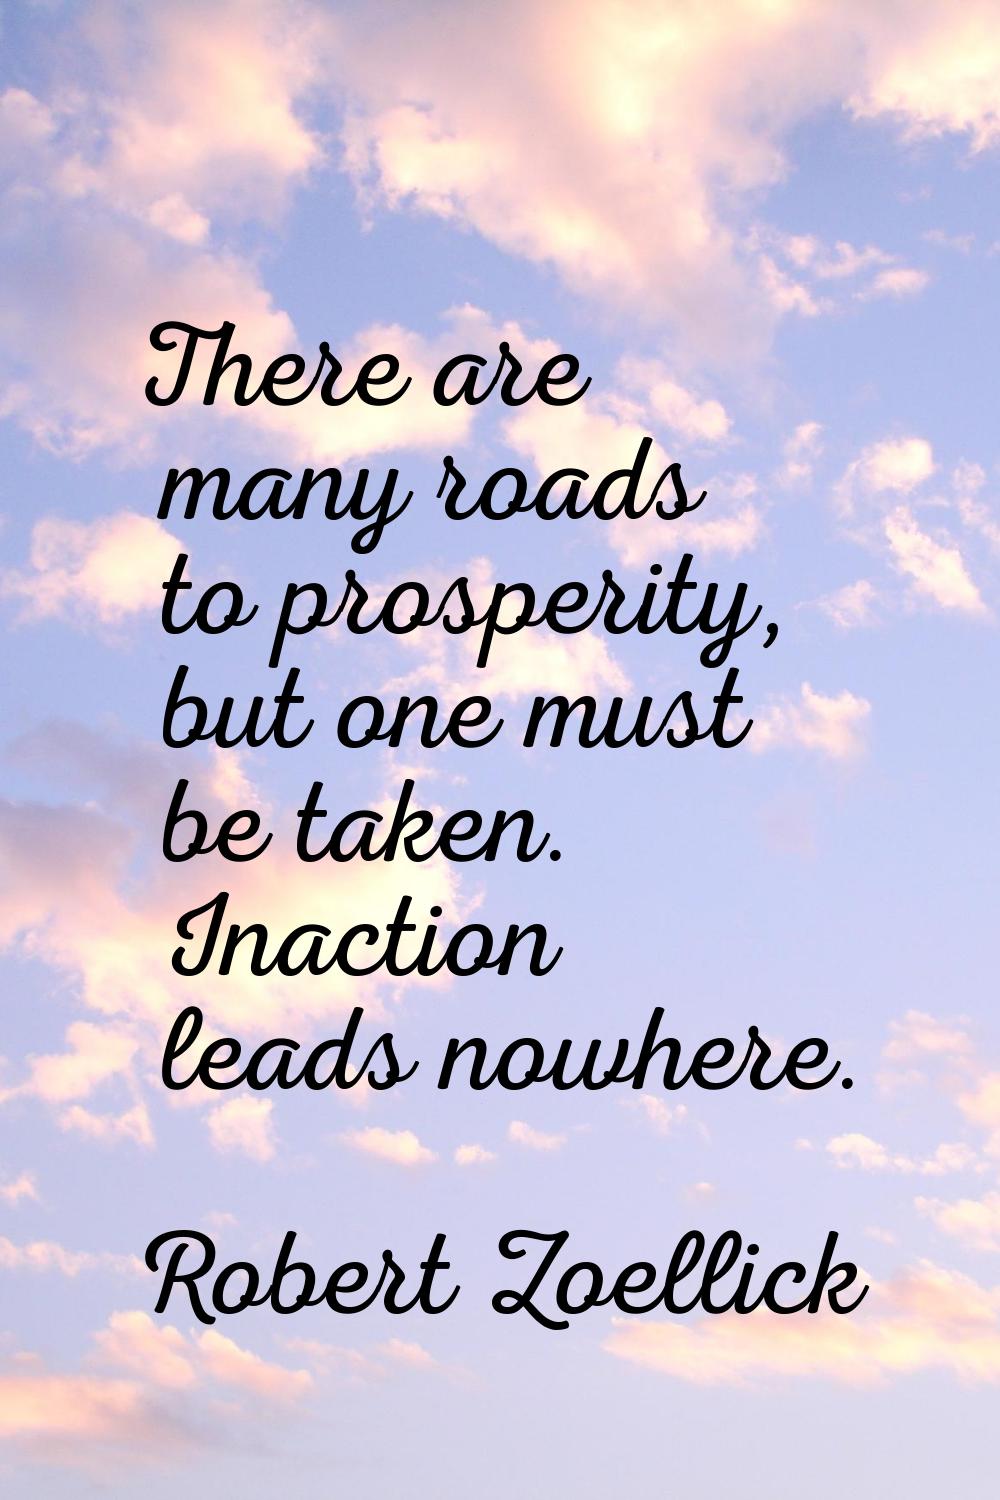 There are many roads to prosperity, but one must be taken. Inaction leads nowhere.